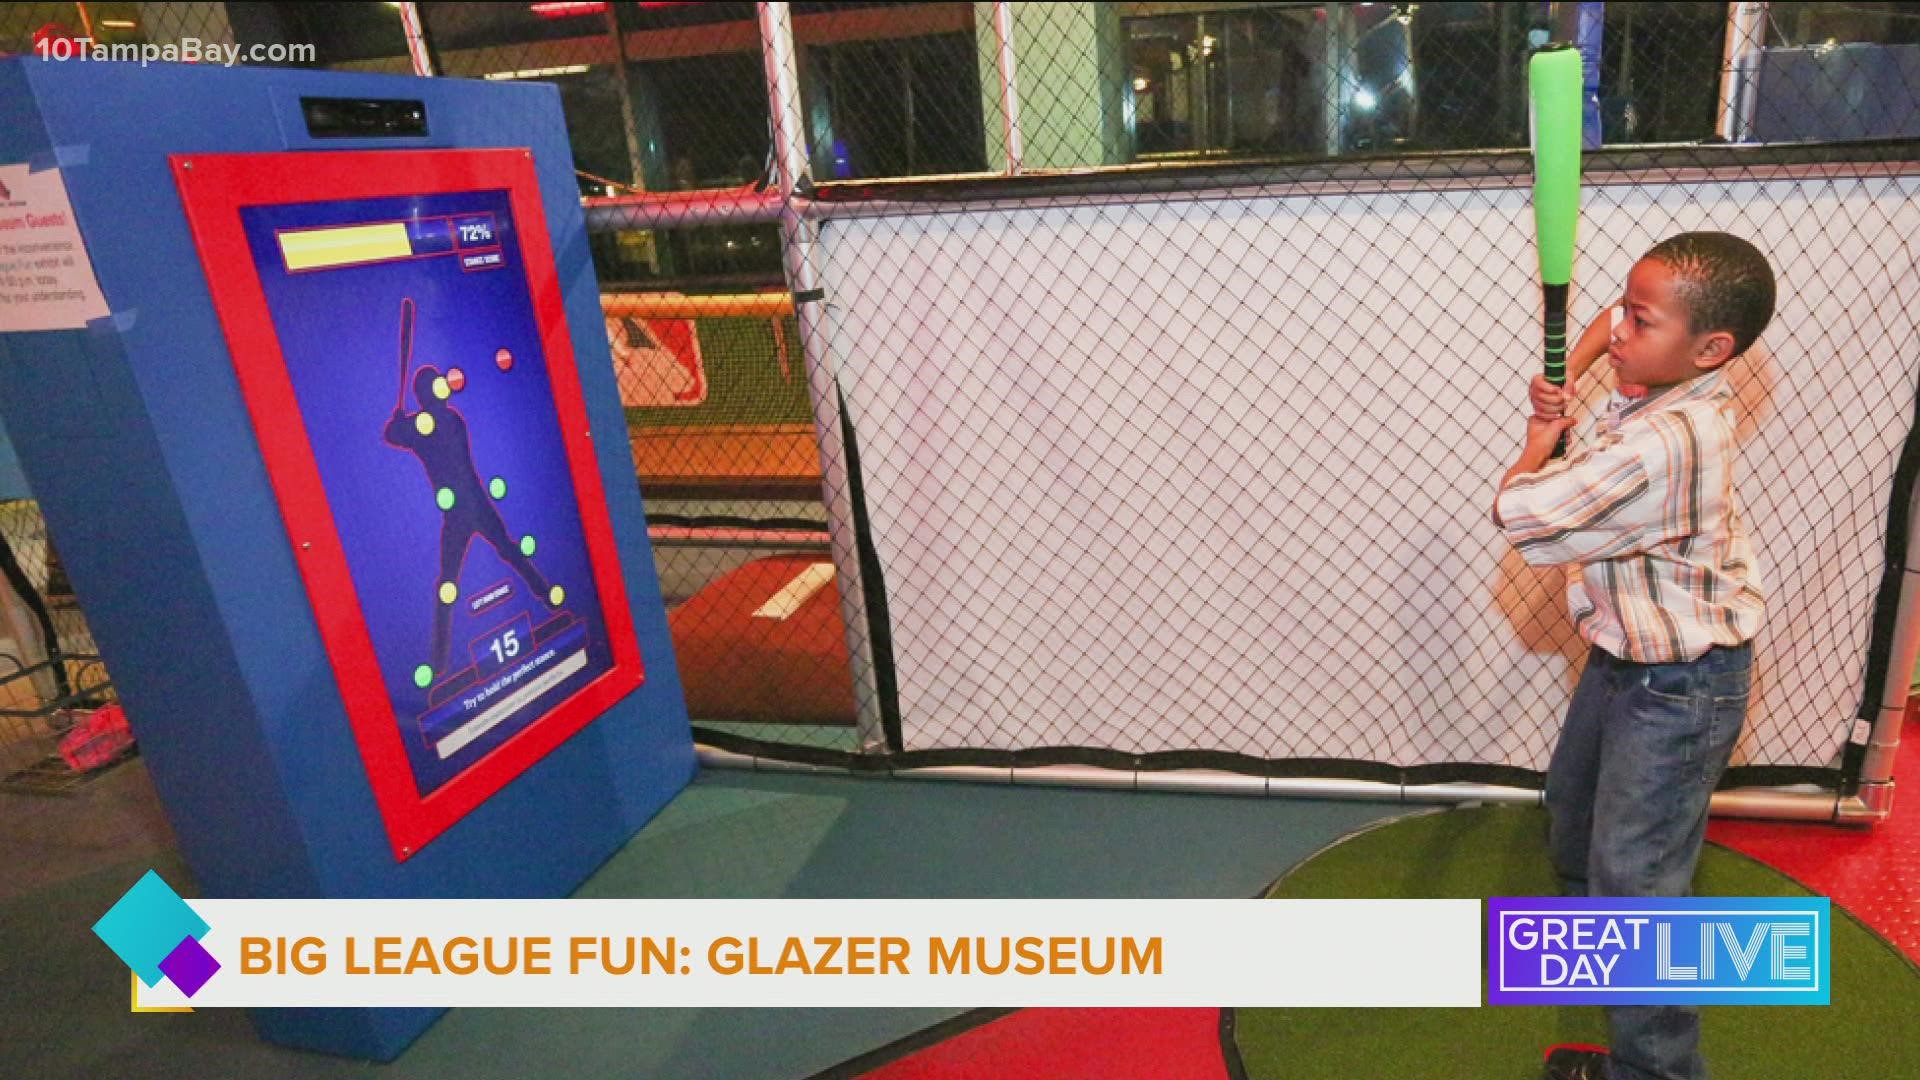 A new exhibit at the Glazer Children's Museum ensures a home run of fun for the whole family